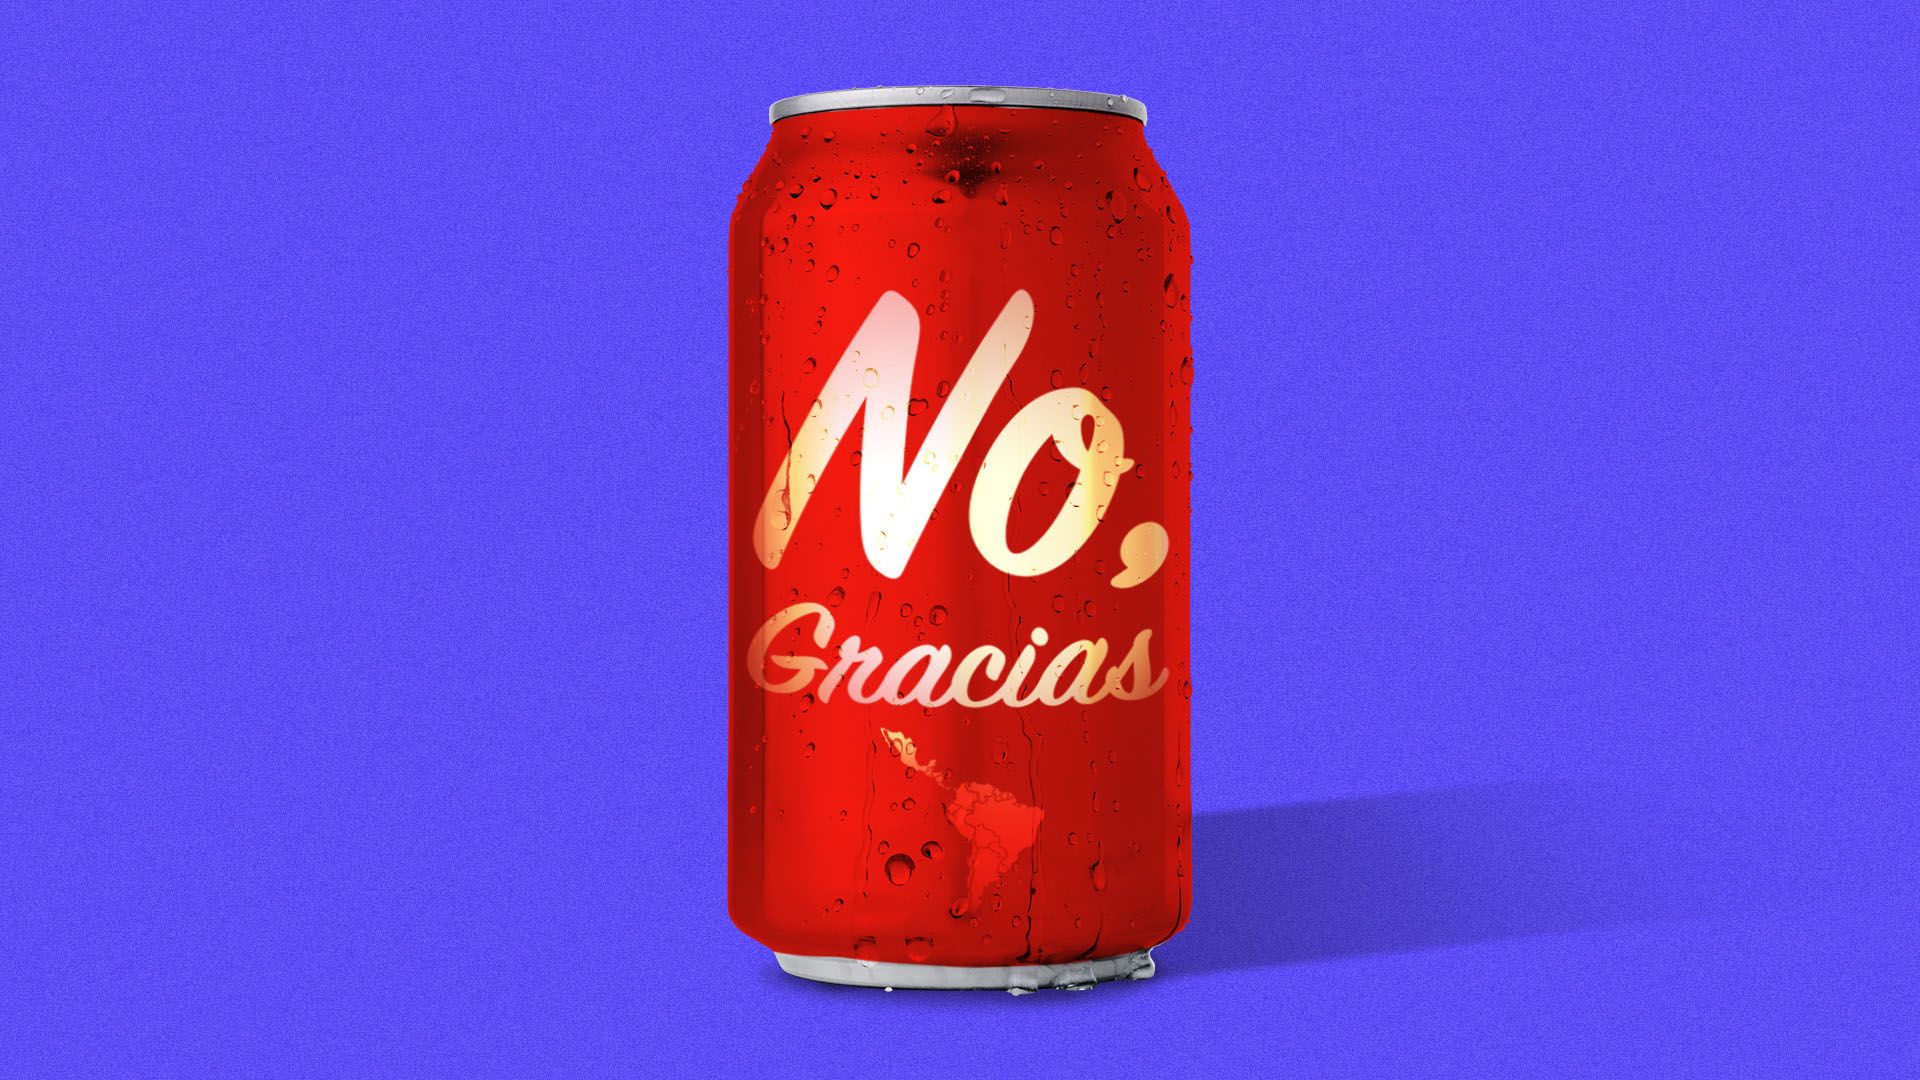 Illustration of a soda can that reads "no, gracias"